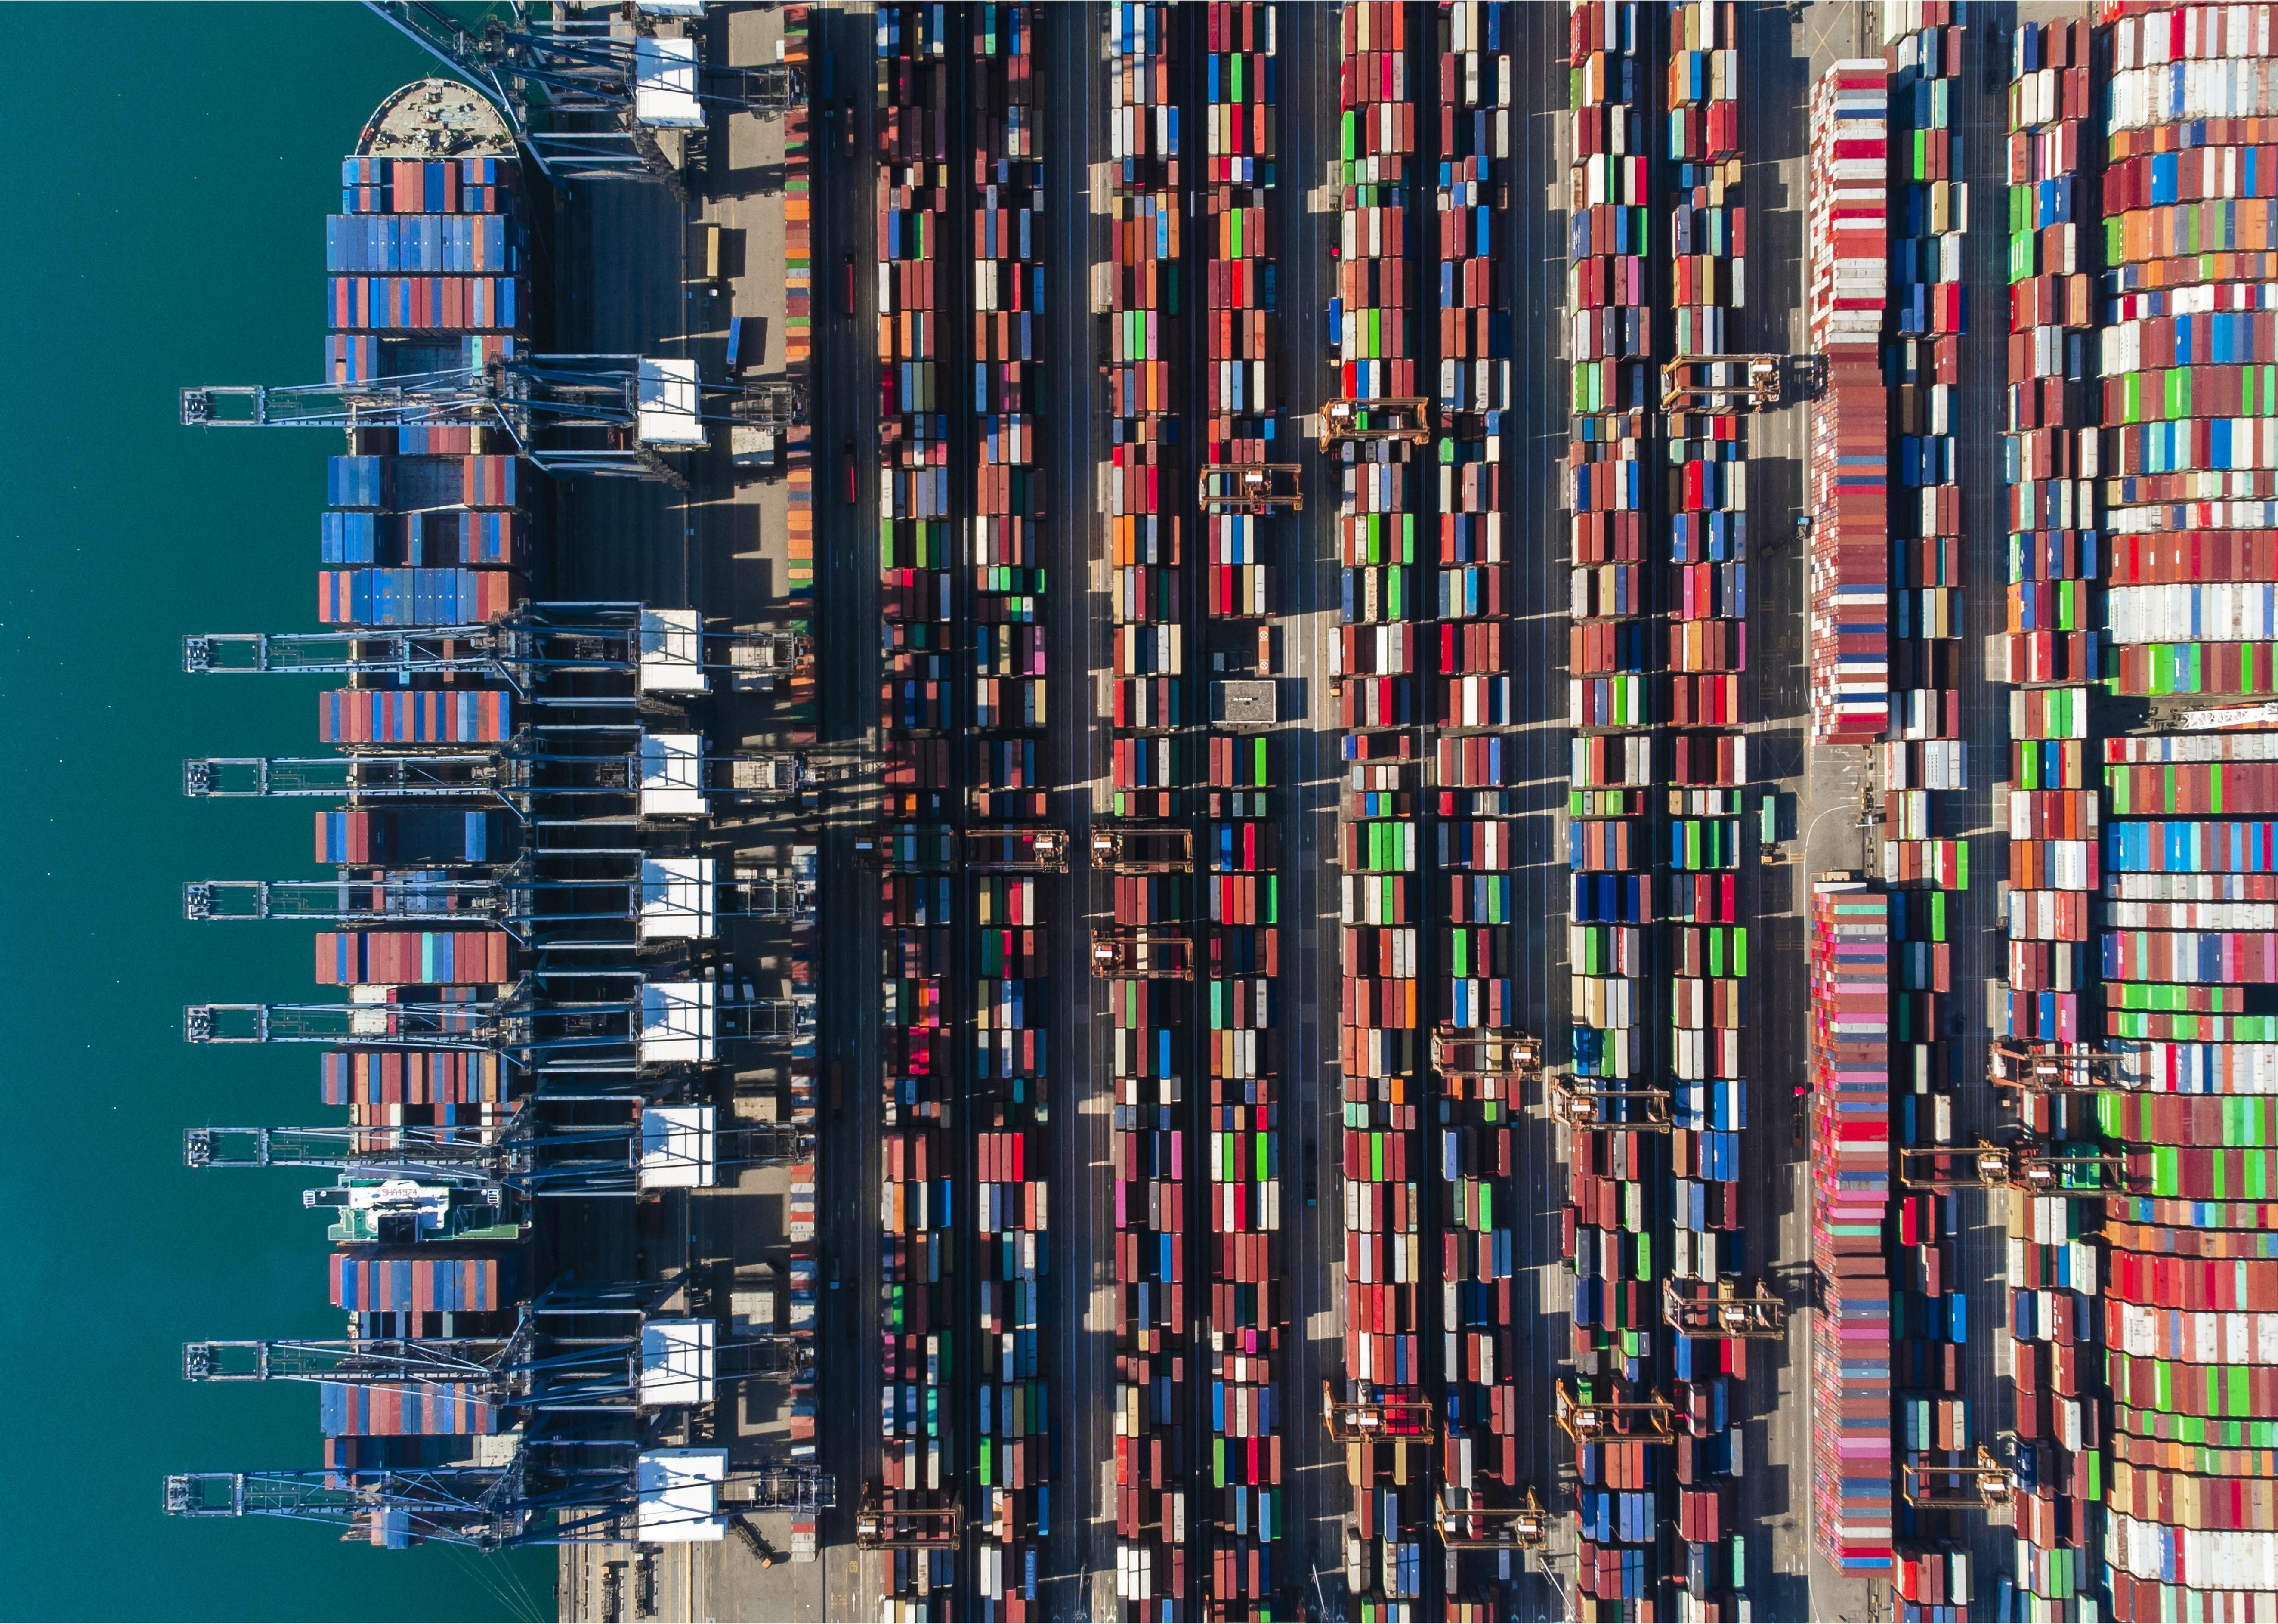 An aerial view of containers piled at a port.